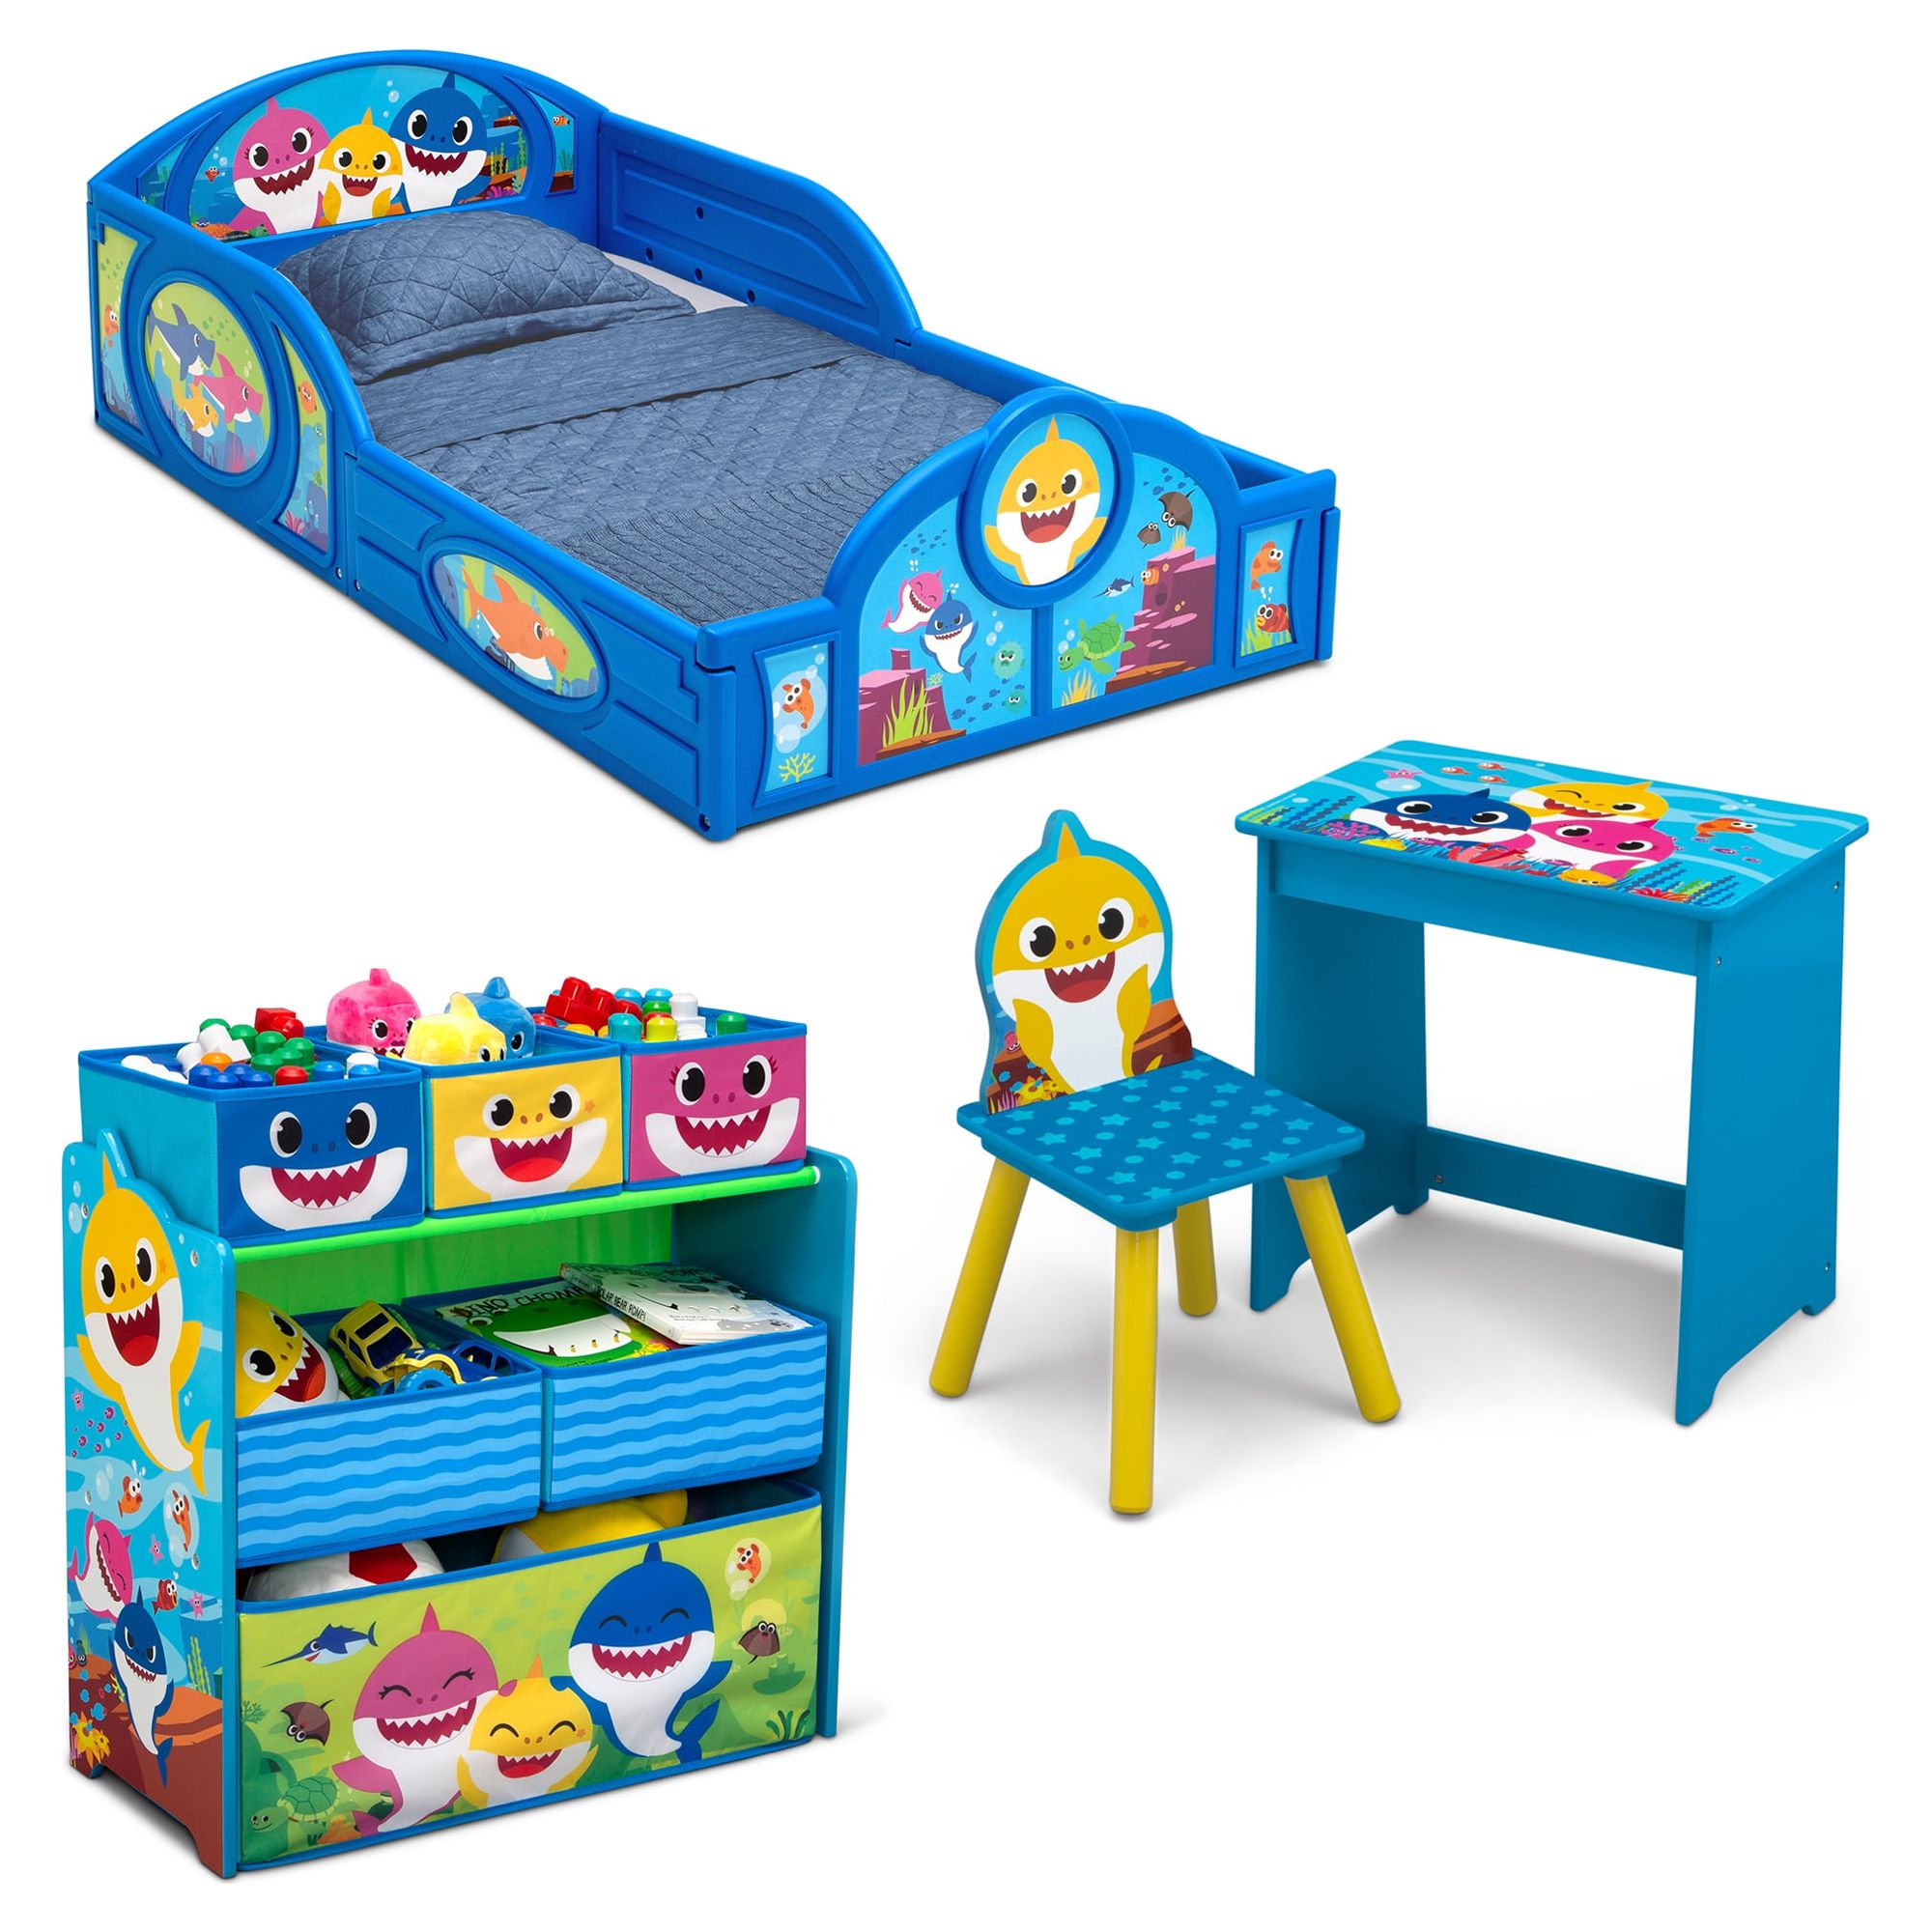 Baby Shark 4-Piece Room-in-a-Box Bedroom Set by Delta Children - Includes Sleep & Play Toddler Bed, 6 Bin Design & Store Toy Organizer and Art Desk with Chair - image 1 of 19